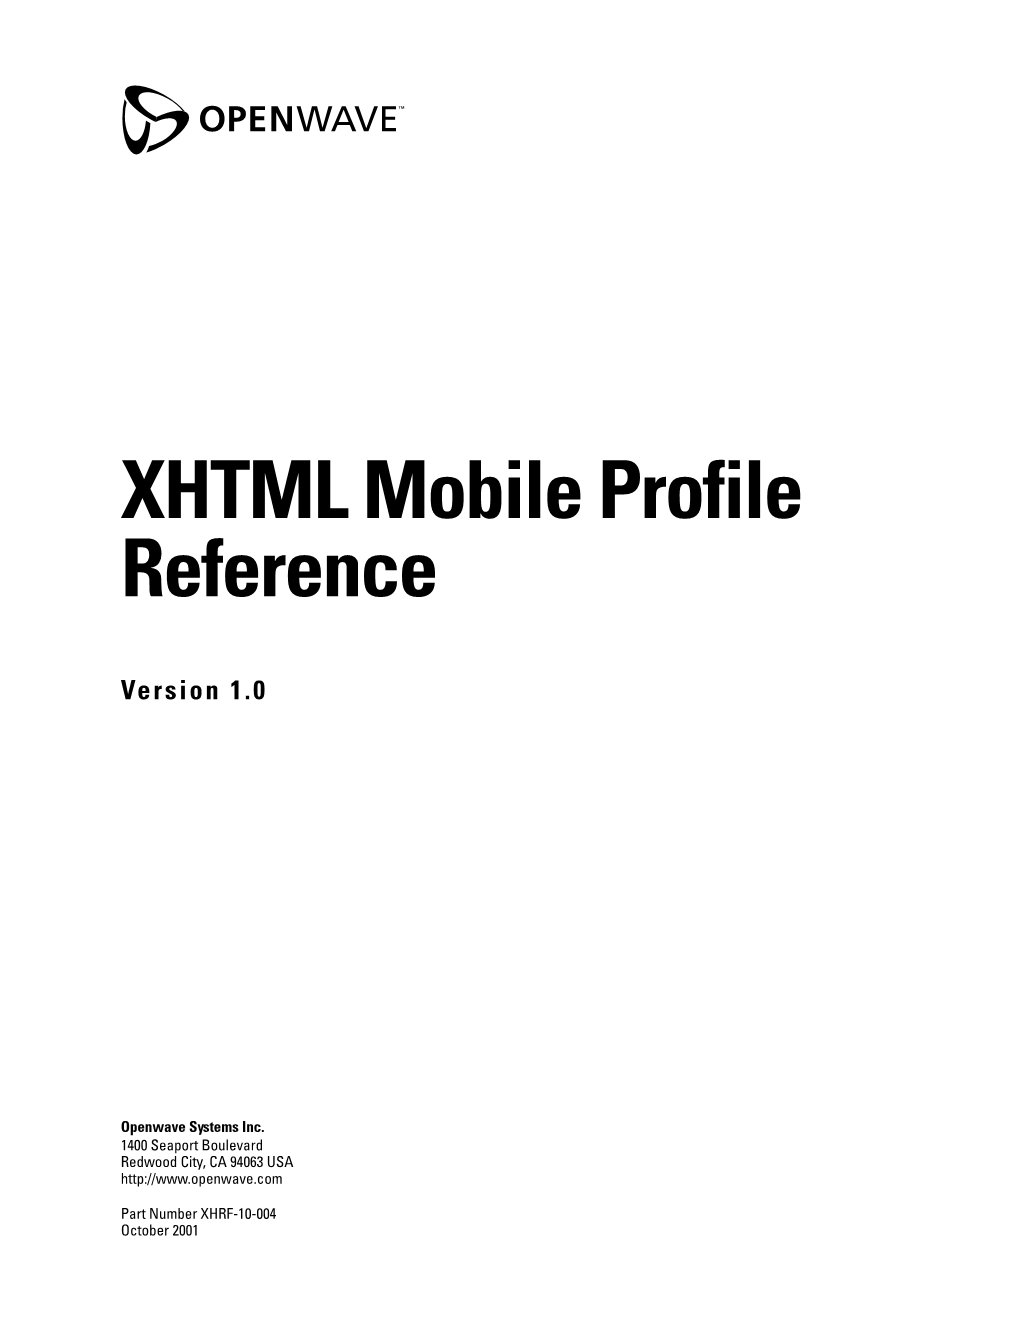 XHTML Mobile Profile Reference